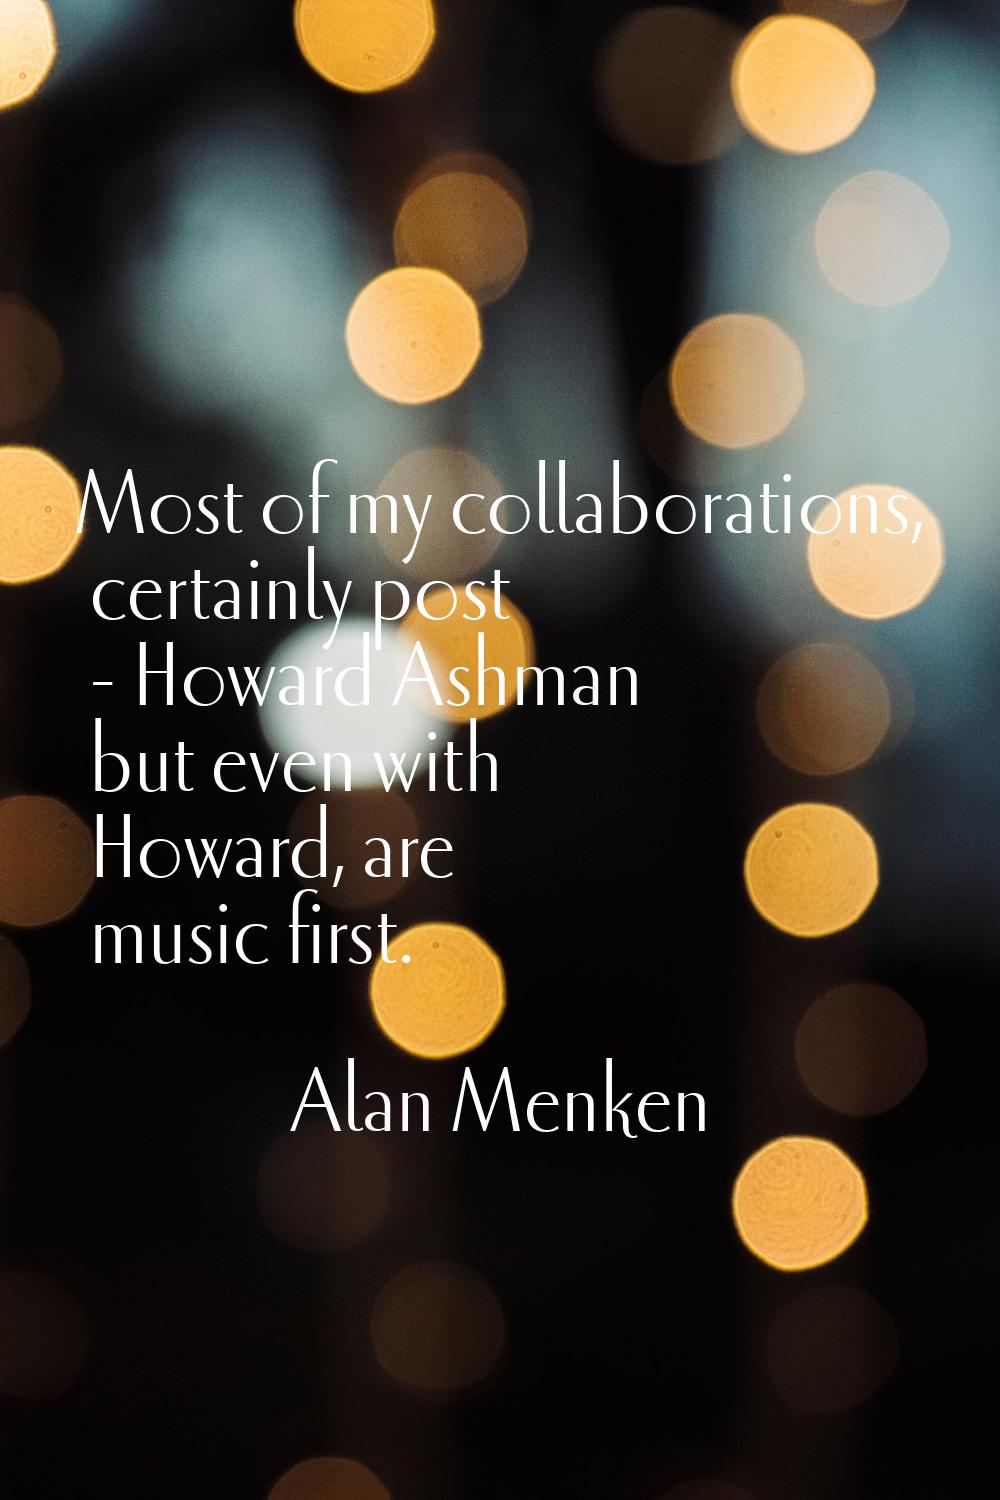 Most of my collaborations, certainly post - Howard Ashman but even with Howard, are music first.